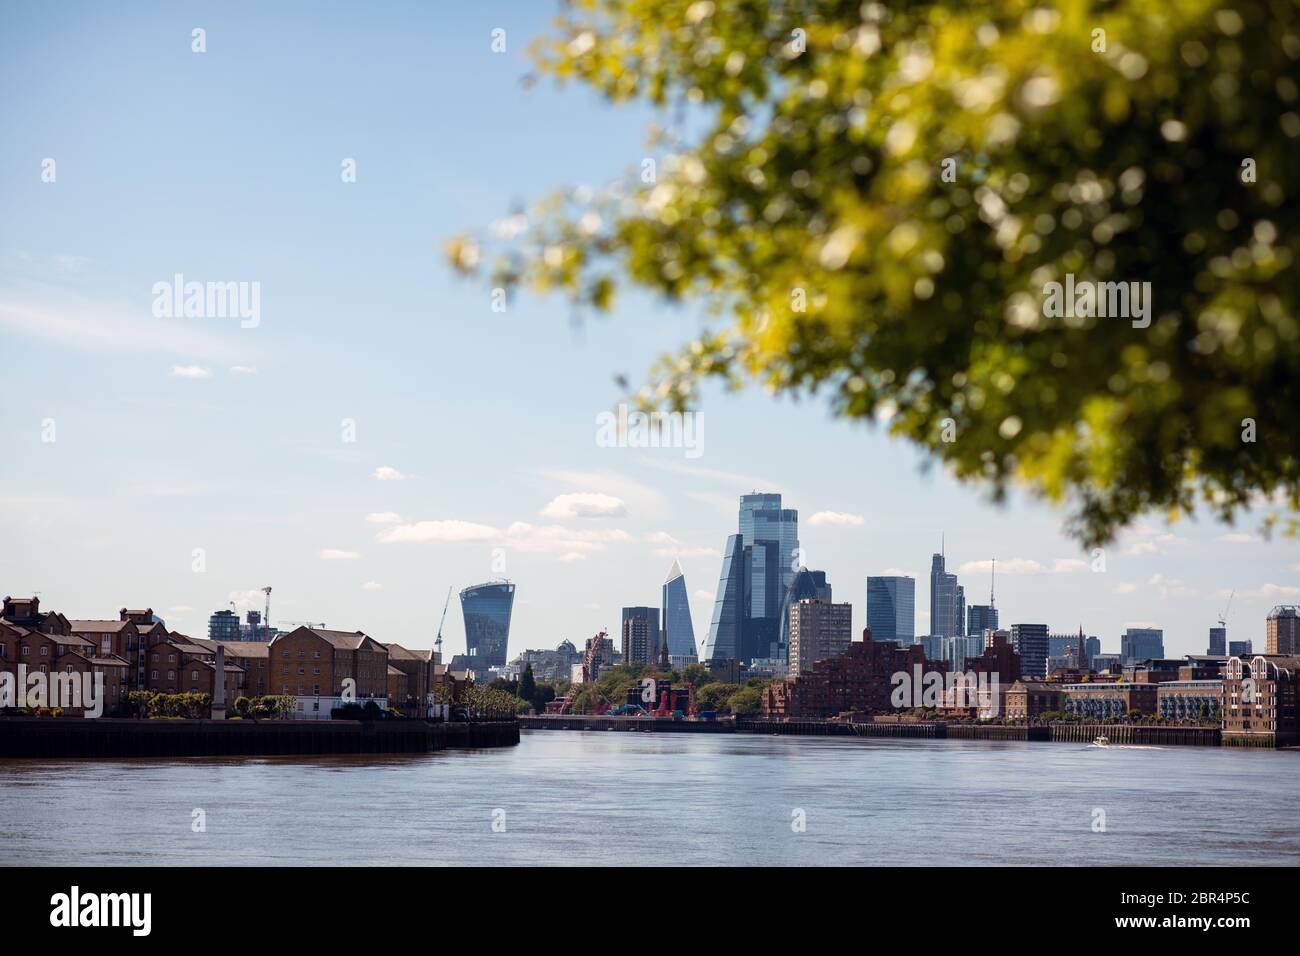 The city of London seen from Canary wharf along the river Thames Stock Photo